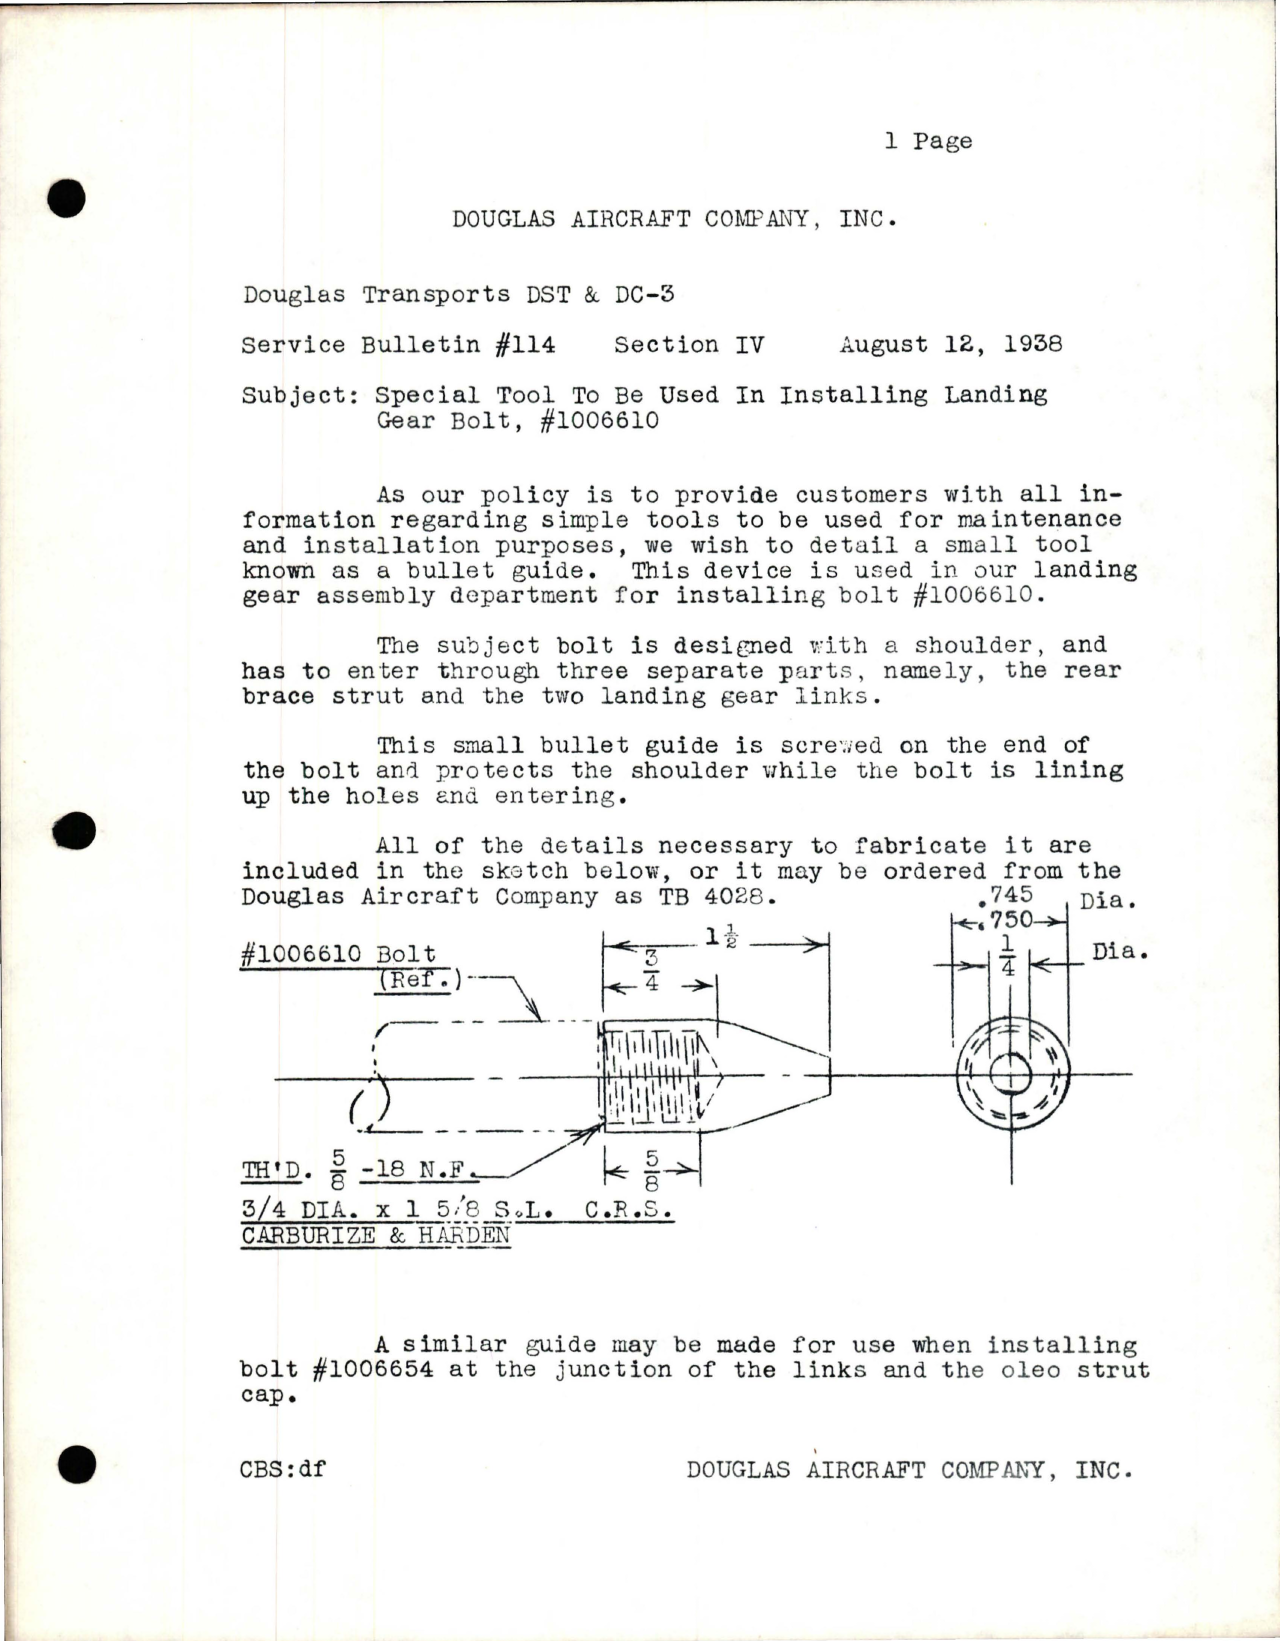 Sample page 1 from AirCorps Library document: Special Tool to be used in Installing Landing Gear Bolt - 1006610